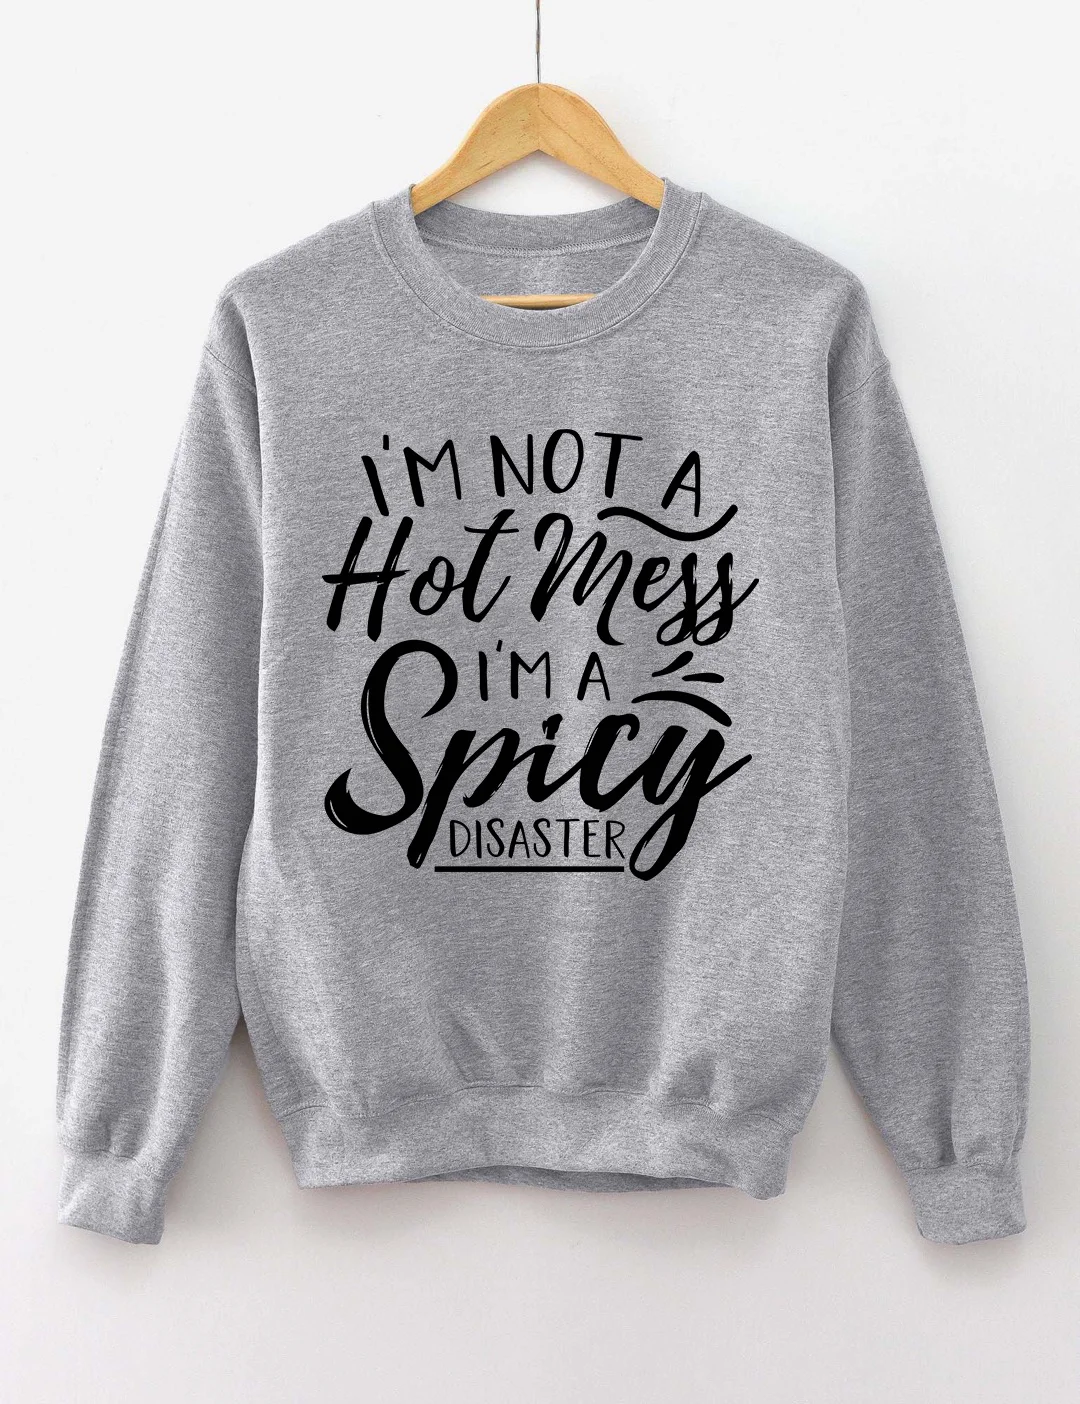 I'm Not A Hot Mess I'm A Spicy Disaster Sweatshirt